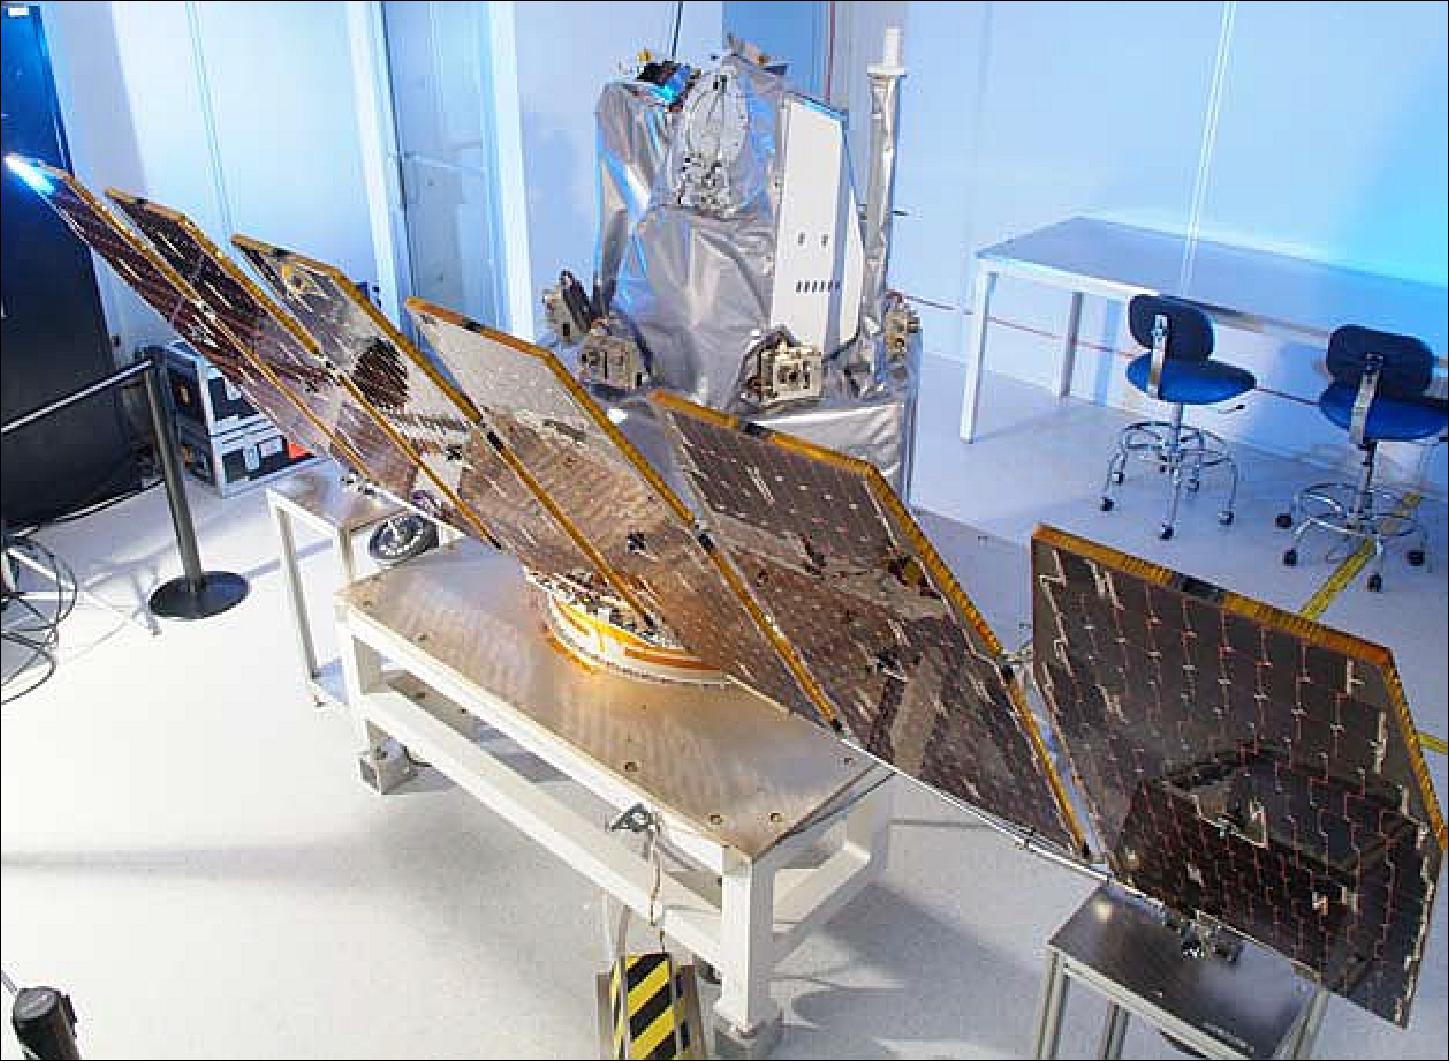 Figure 5: Photo of the AIM spacecraft with the solar array fully deployed (image credit OSC)